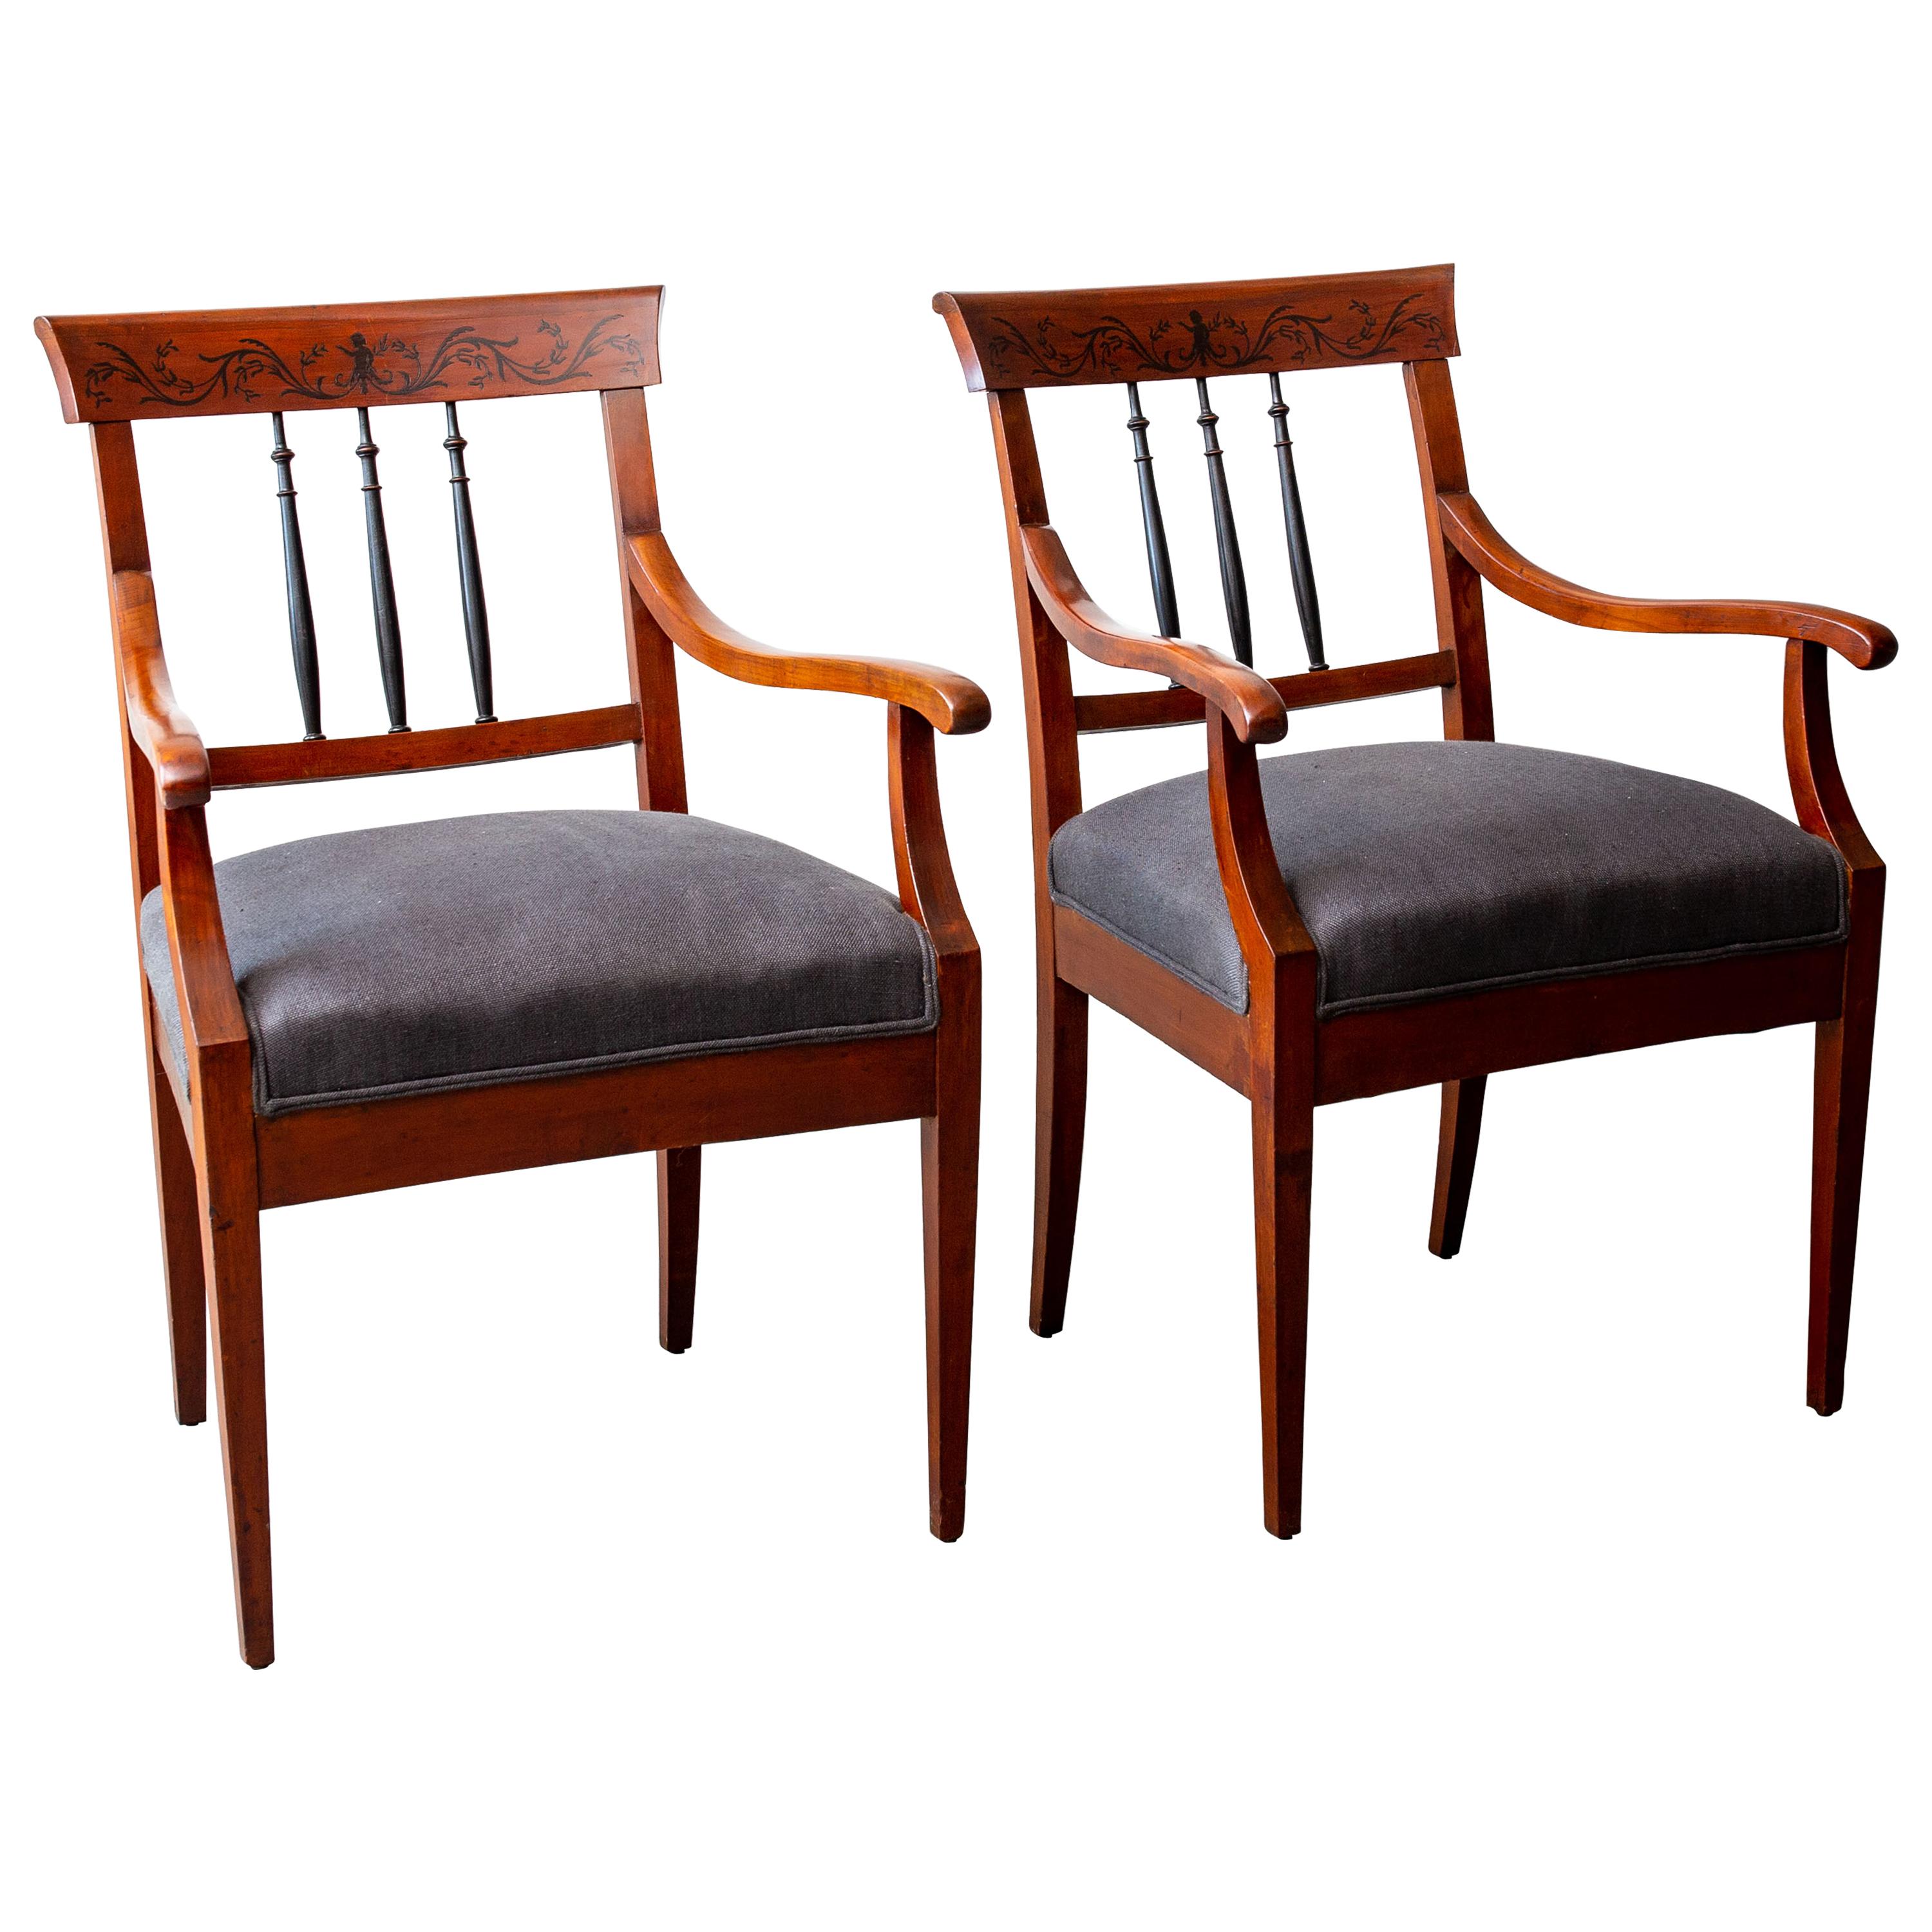 Pair of Mahogany Neoclassical Style Armchairs